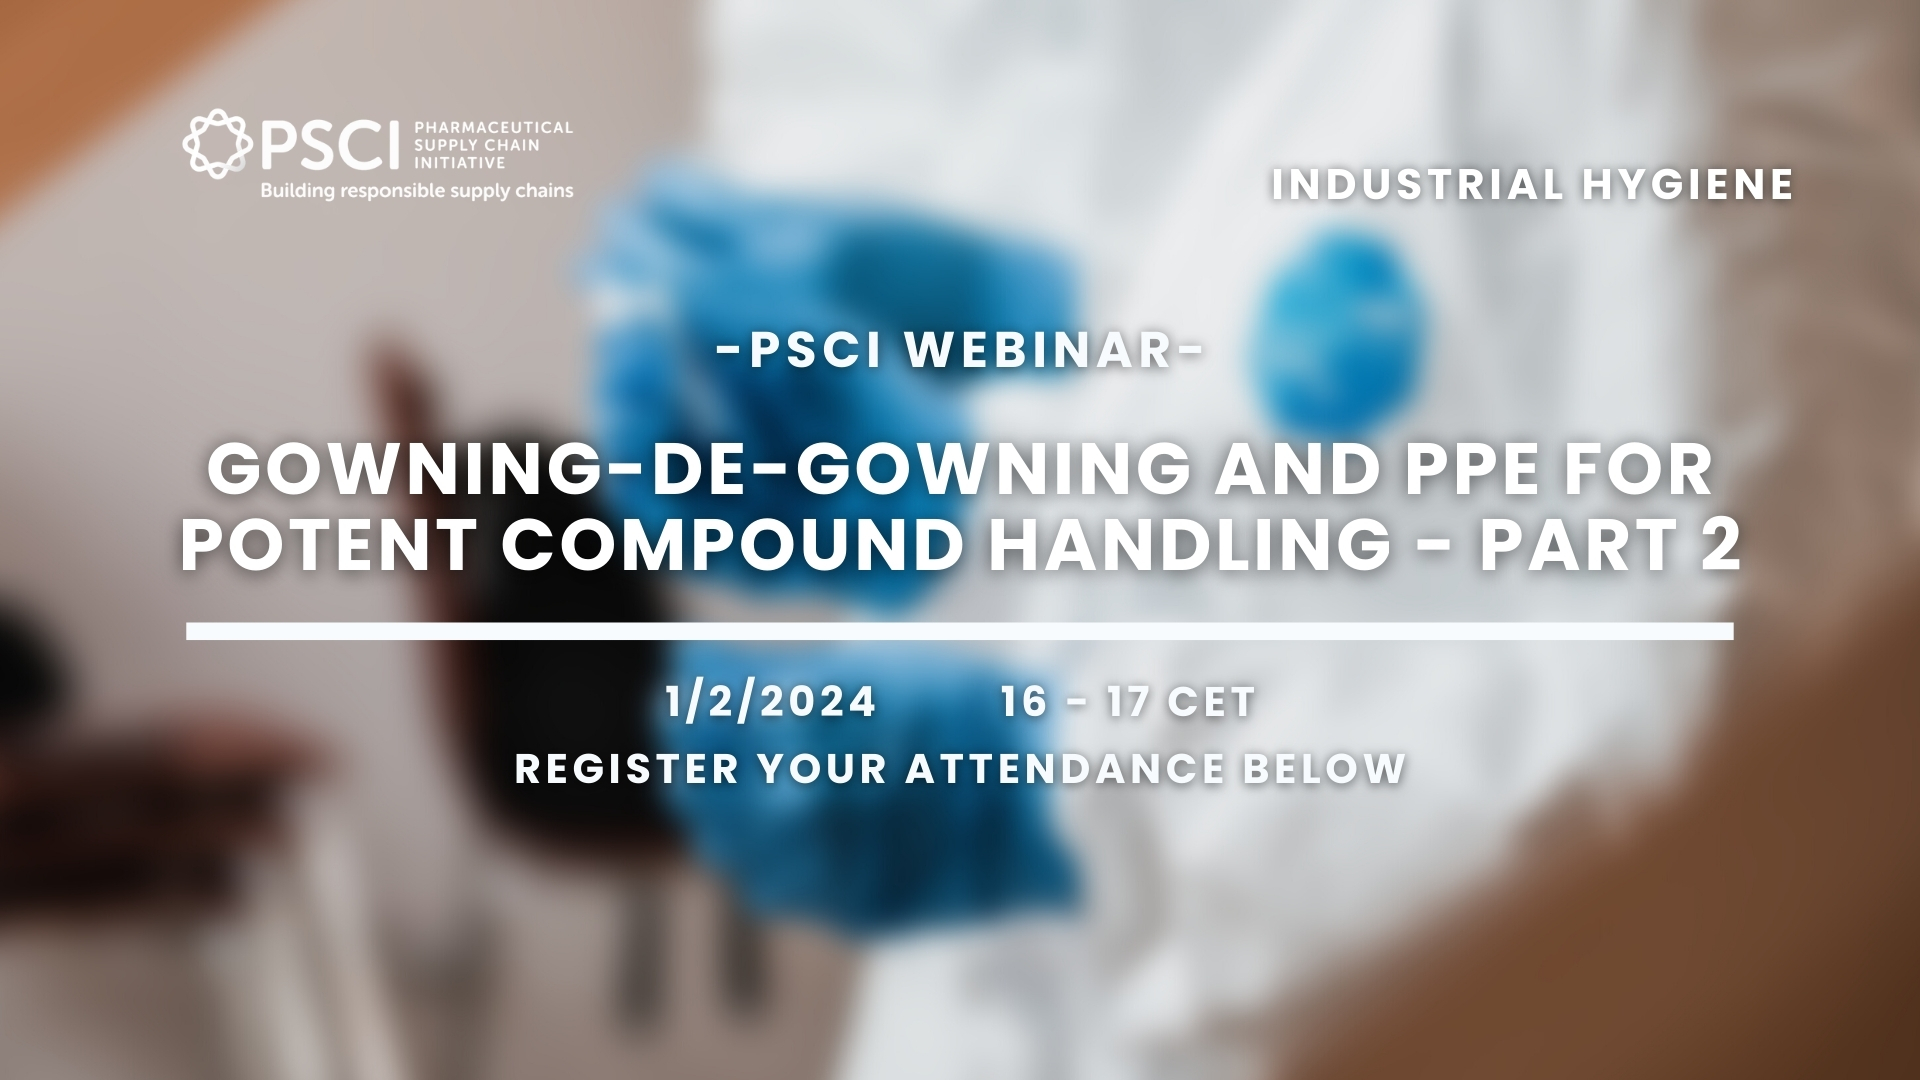 PSCI Webinar: Gowning-De-gowning and PPE for Potent Compound Handling - Part 2